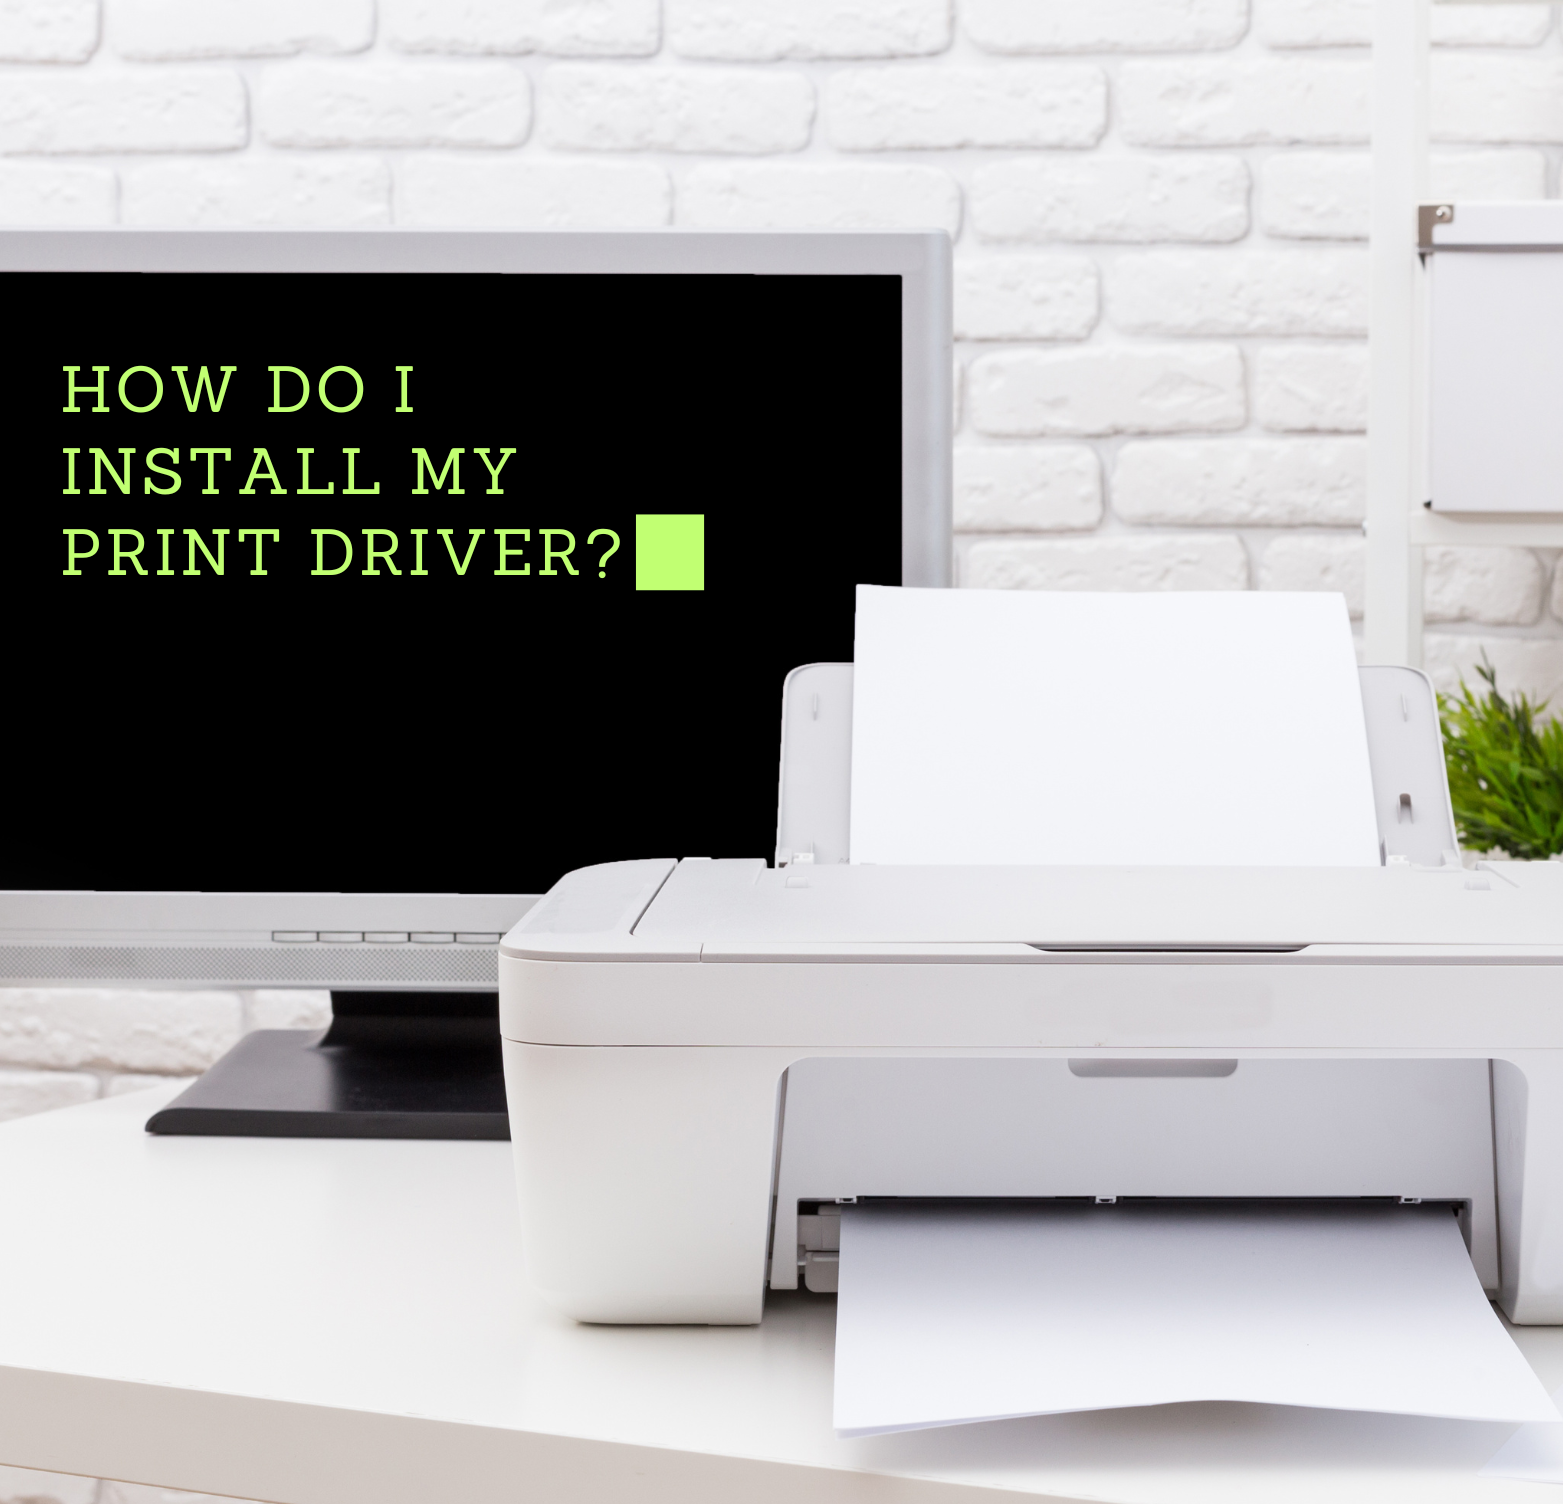 how do I install my printer driver text over computer monitor with printer in the foreground